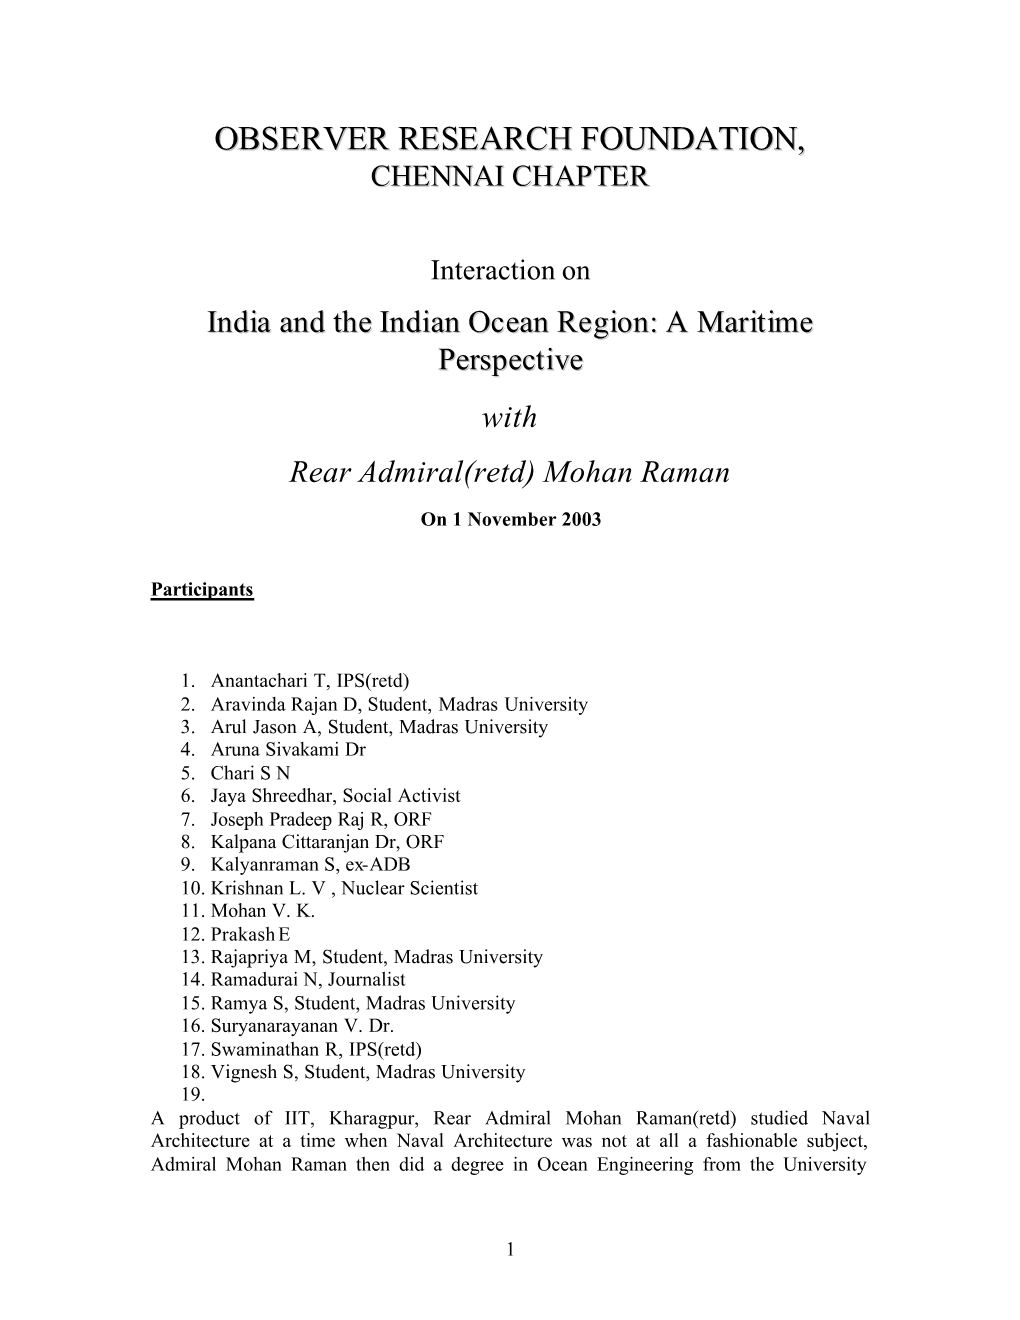 E-India and the Indian Ocean Region a Maritime Perspective…